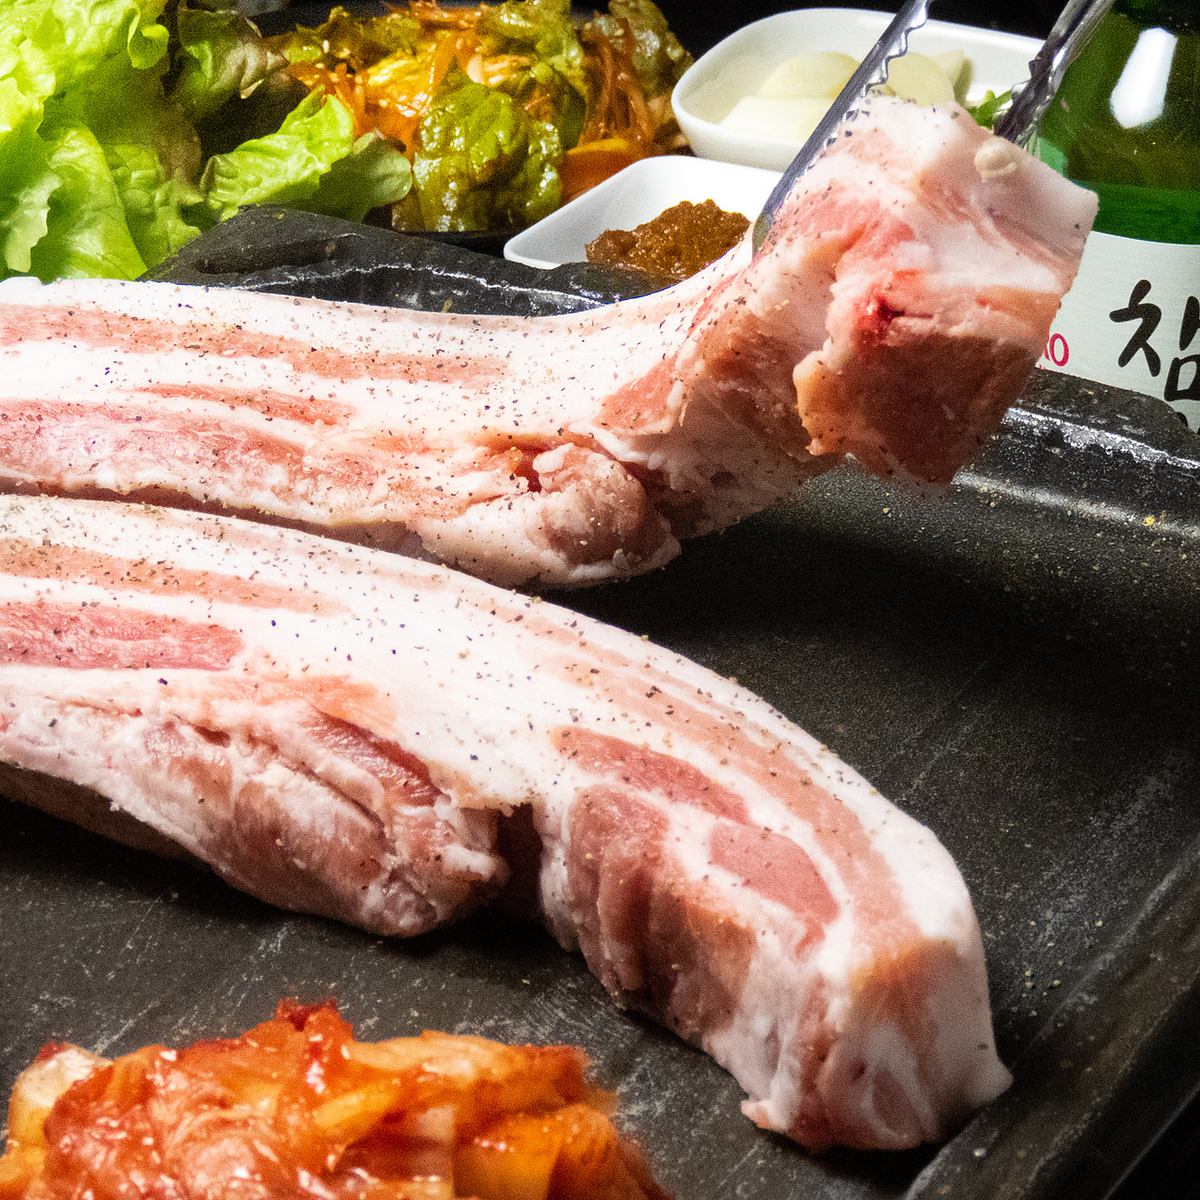 New opening ☆ Samgyeopsal is a hot topic in Shin-Okubo ♪